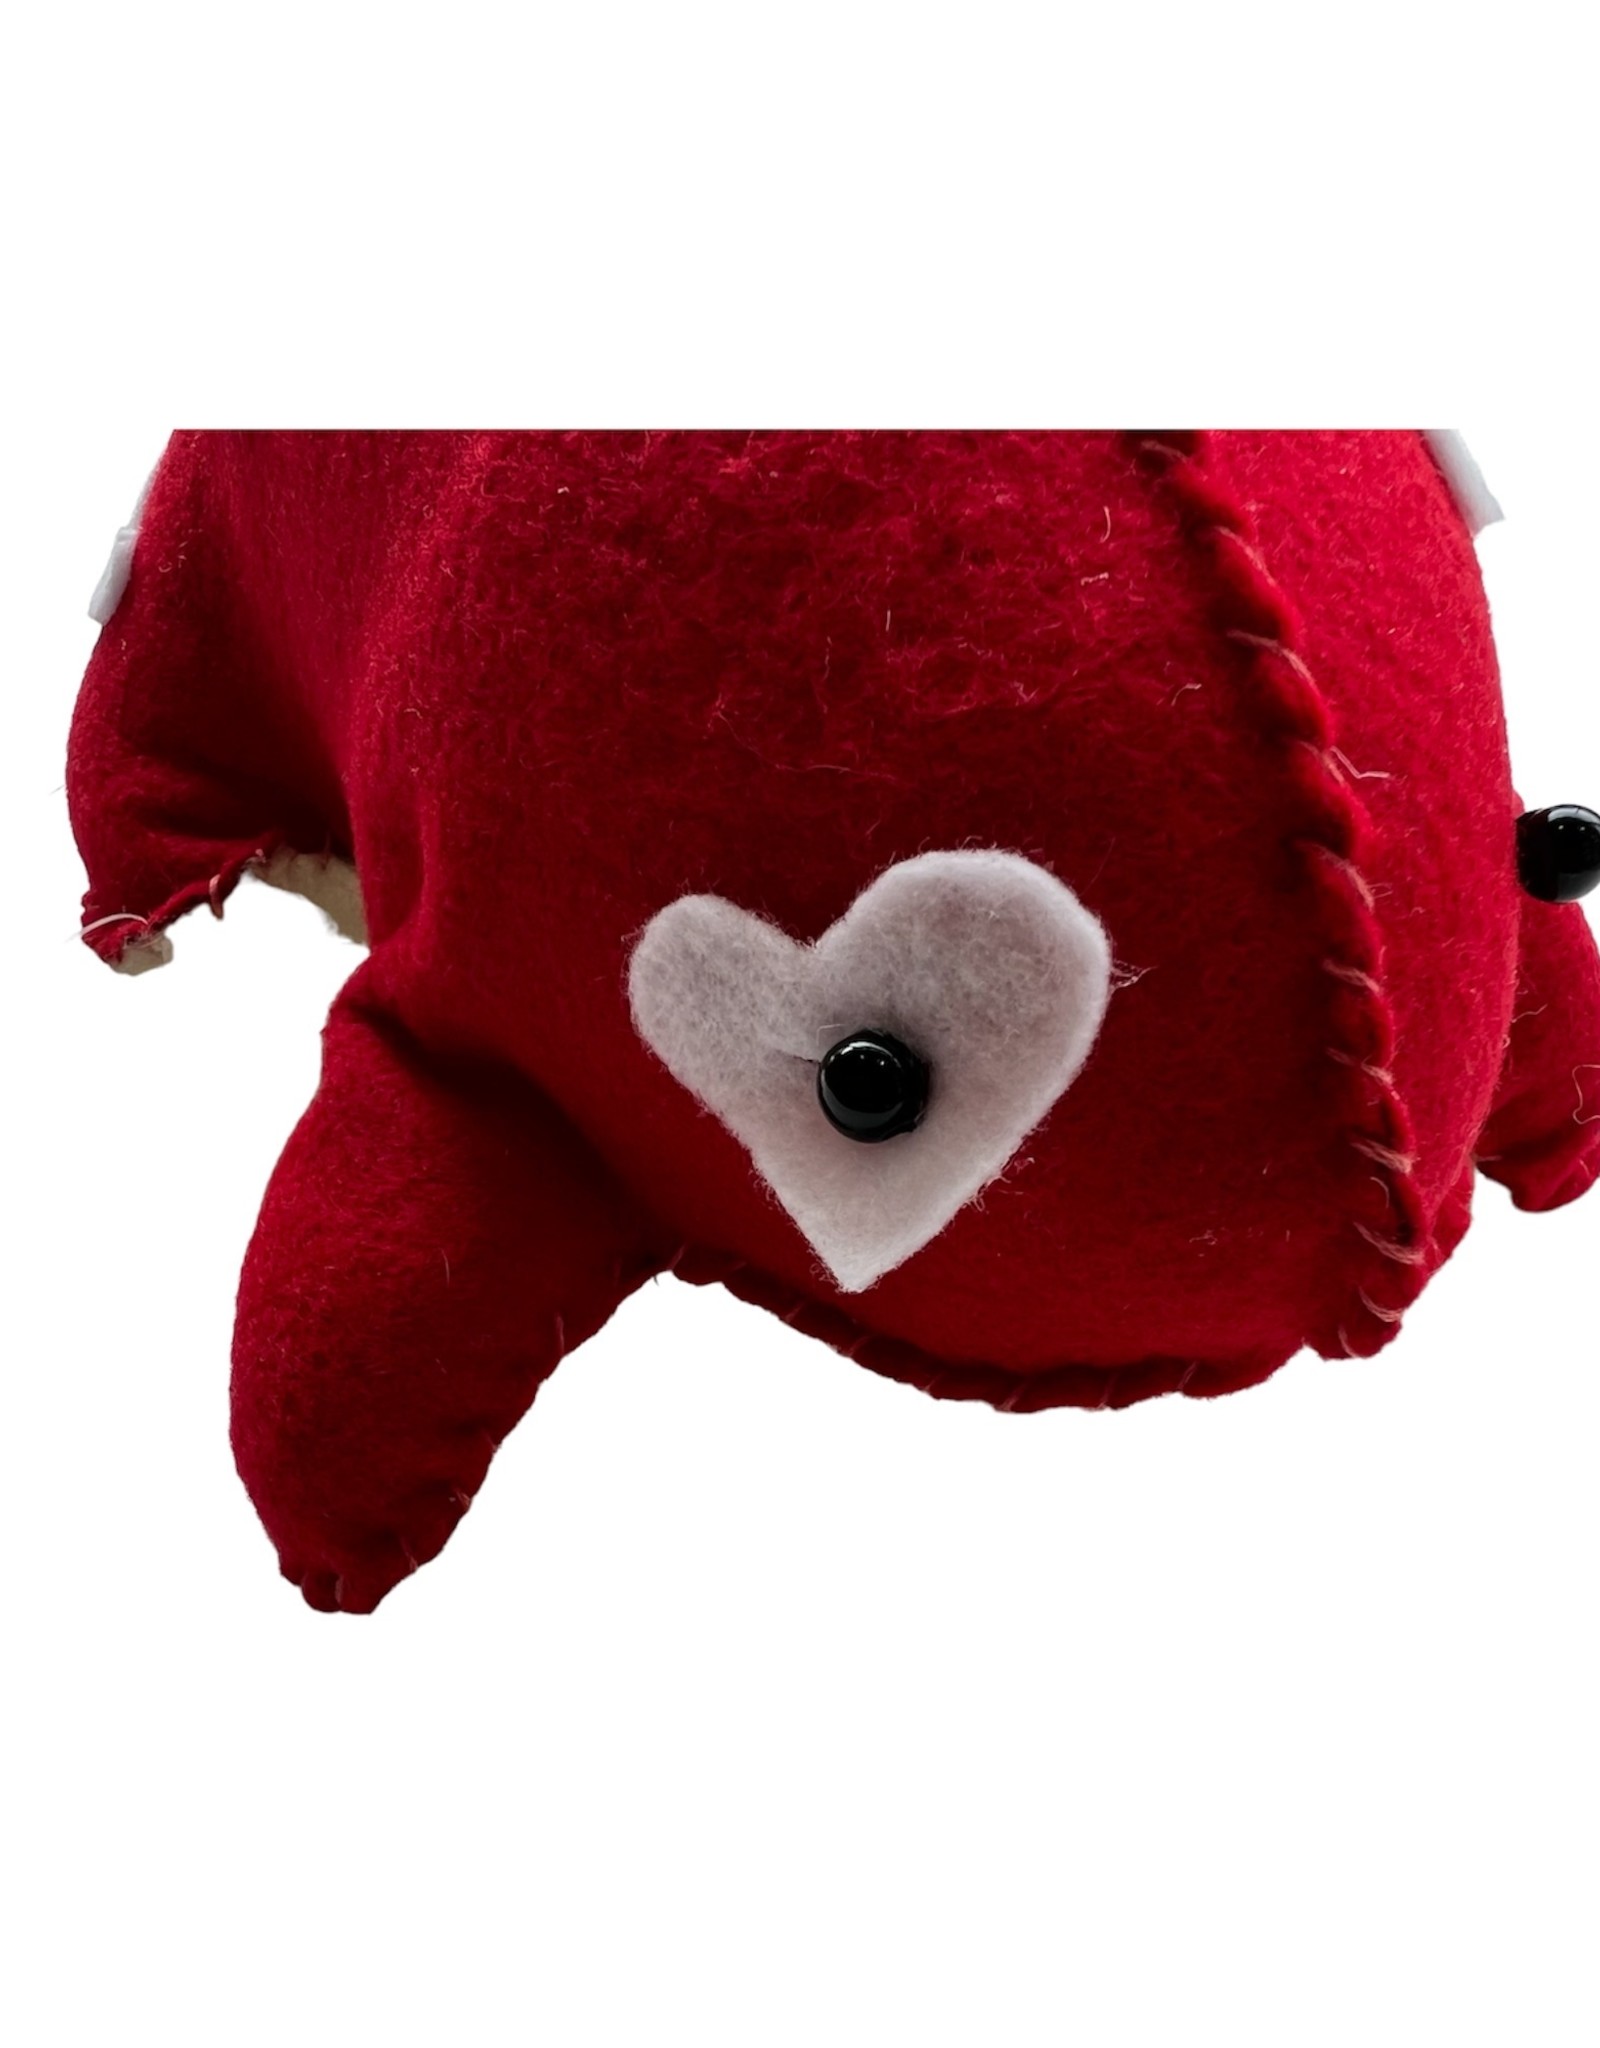 Red Frog, Valentine's Day Collection (large) by Macramentadas